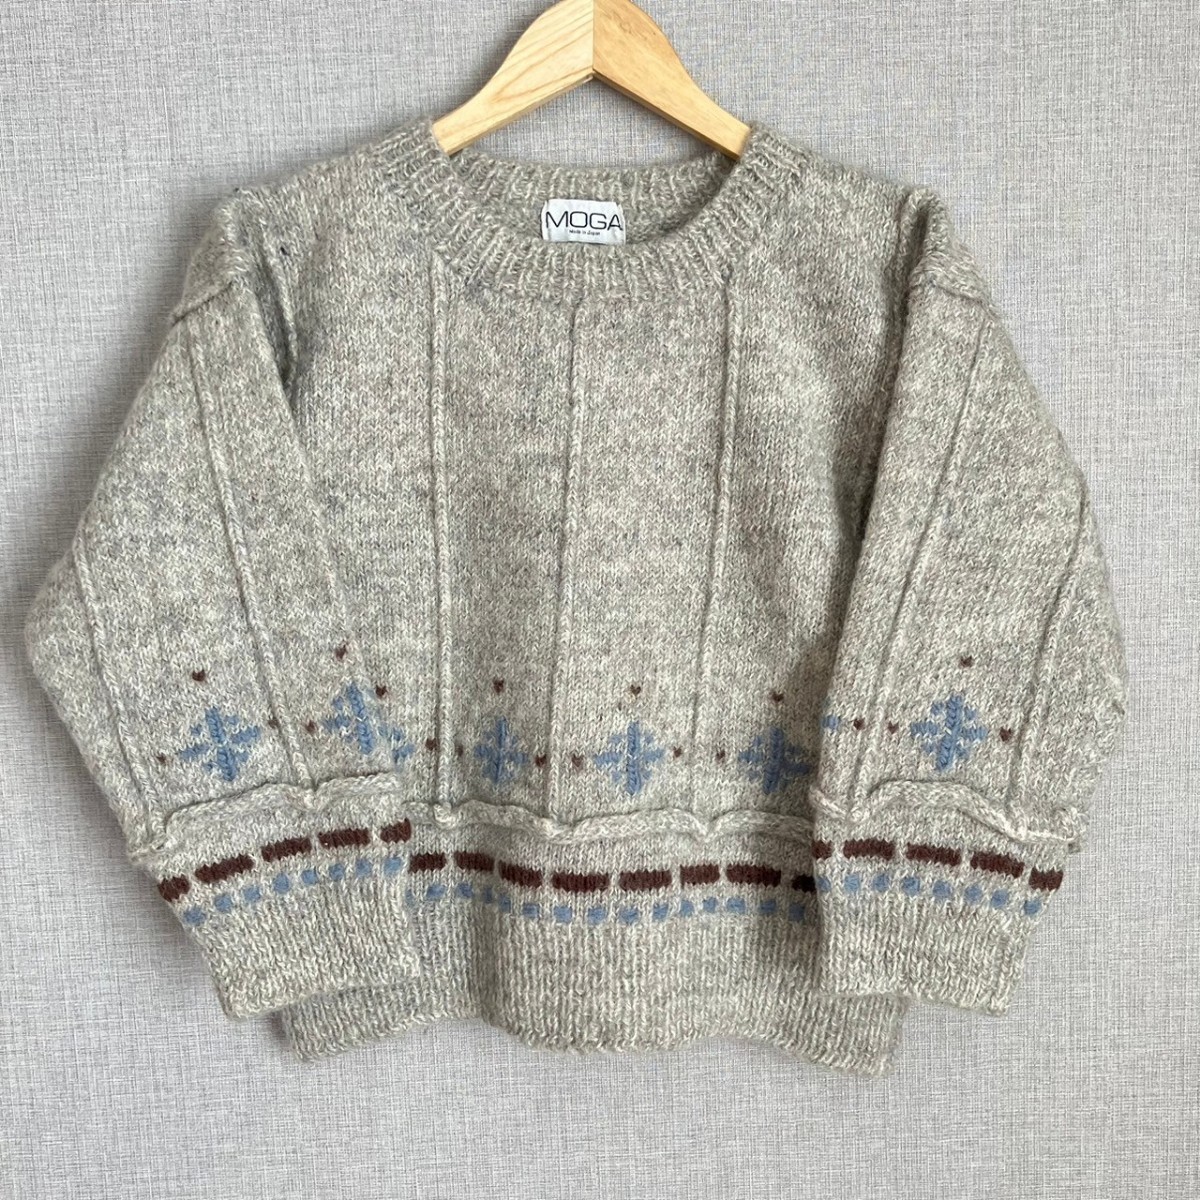 H6596NL made in Japan MOGA Moga size M rank knitted sweater wool knitted wool 100% gray Northern Europe pattern nordic old clothes lady's cropped pants height 